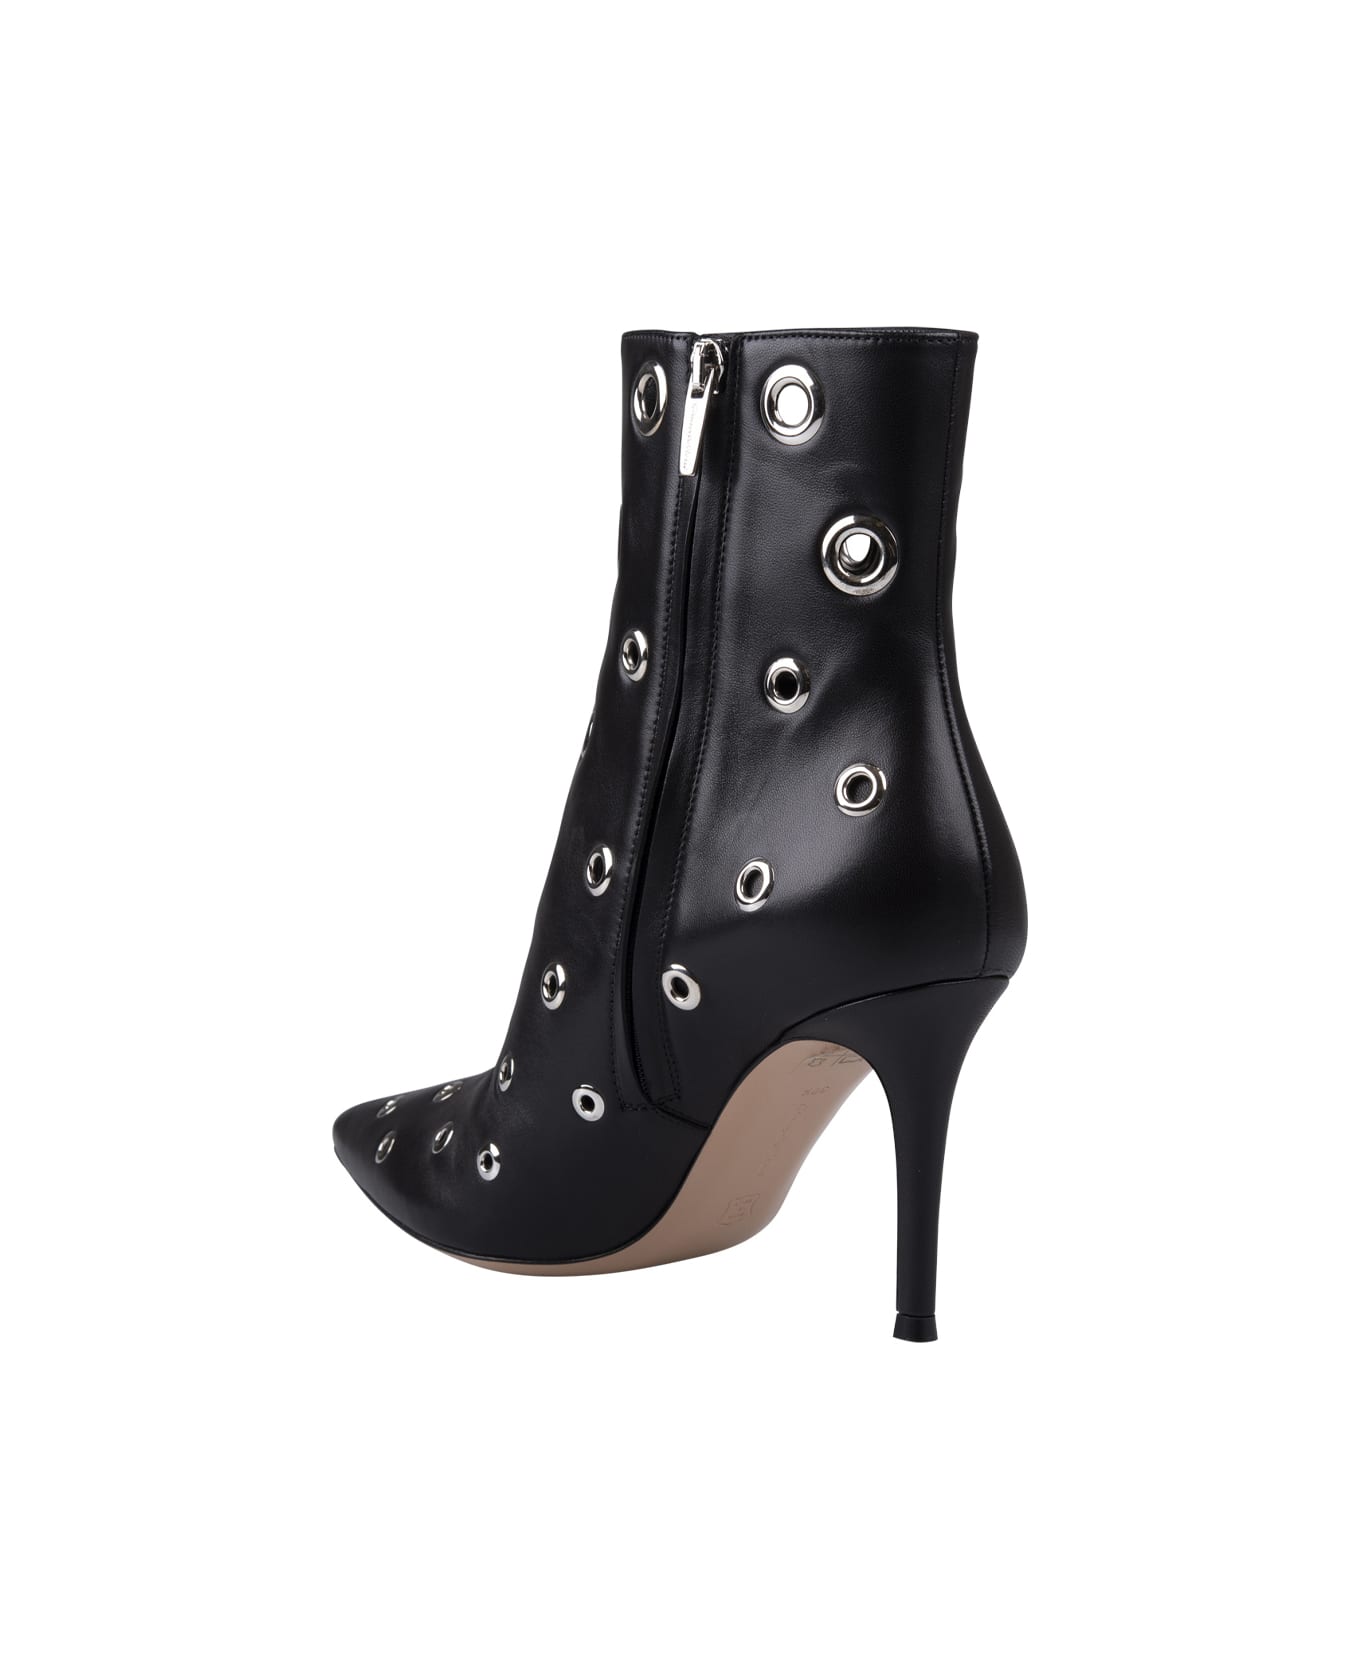 Gianvito Rossi Lydia Bootie 85 Ankle Boots In Black - Black